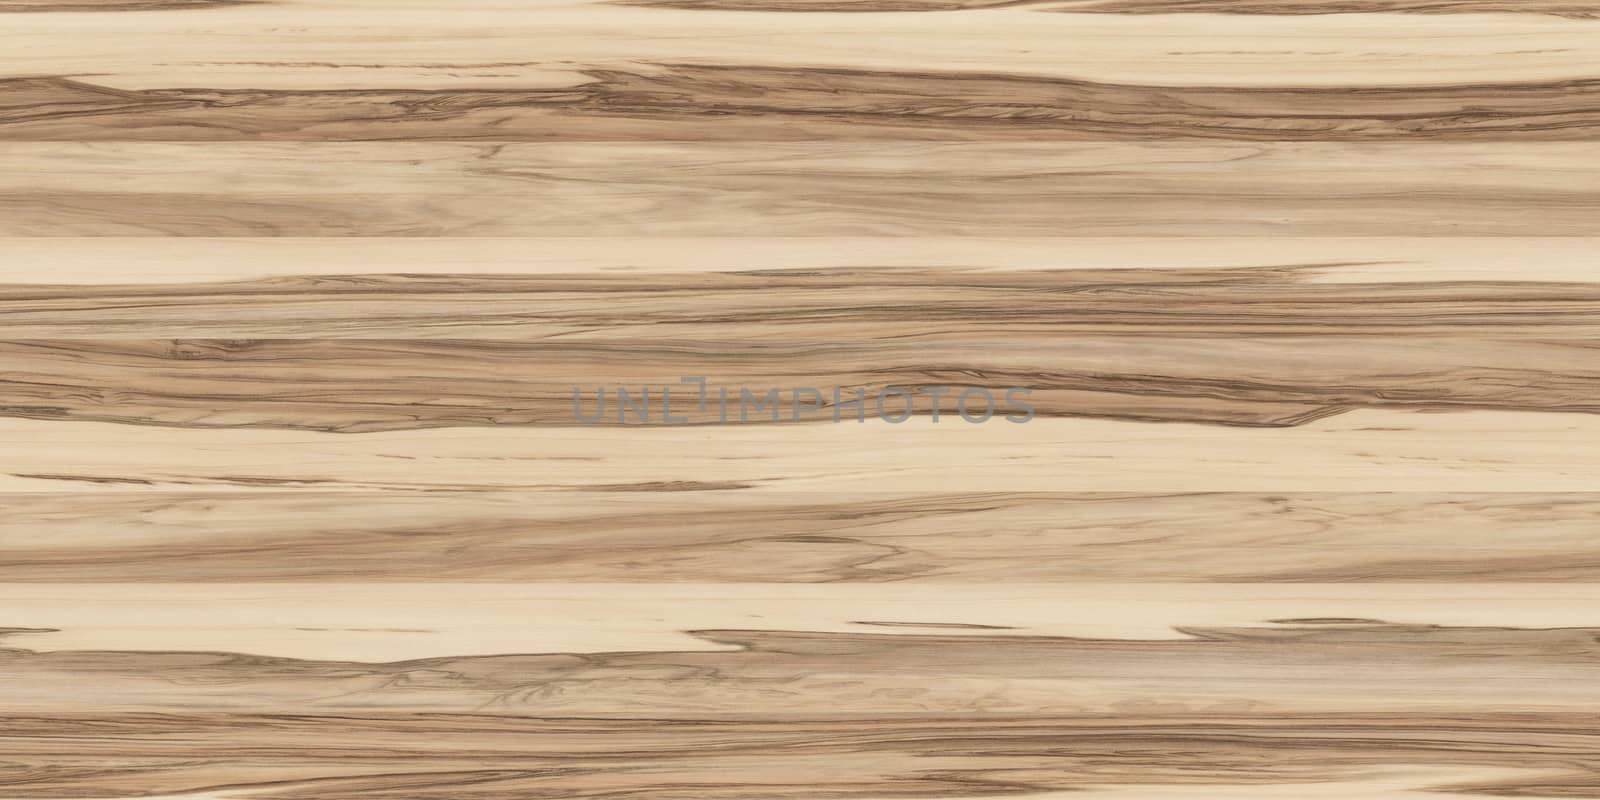 grunge wood pattern texture background, wooden table.